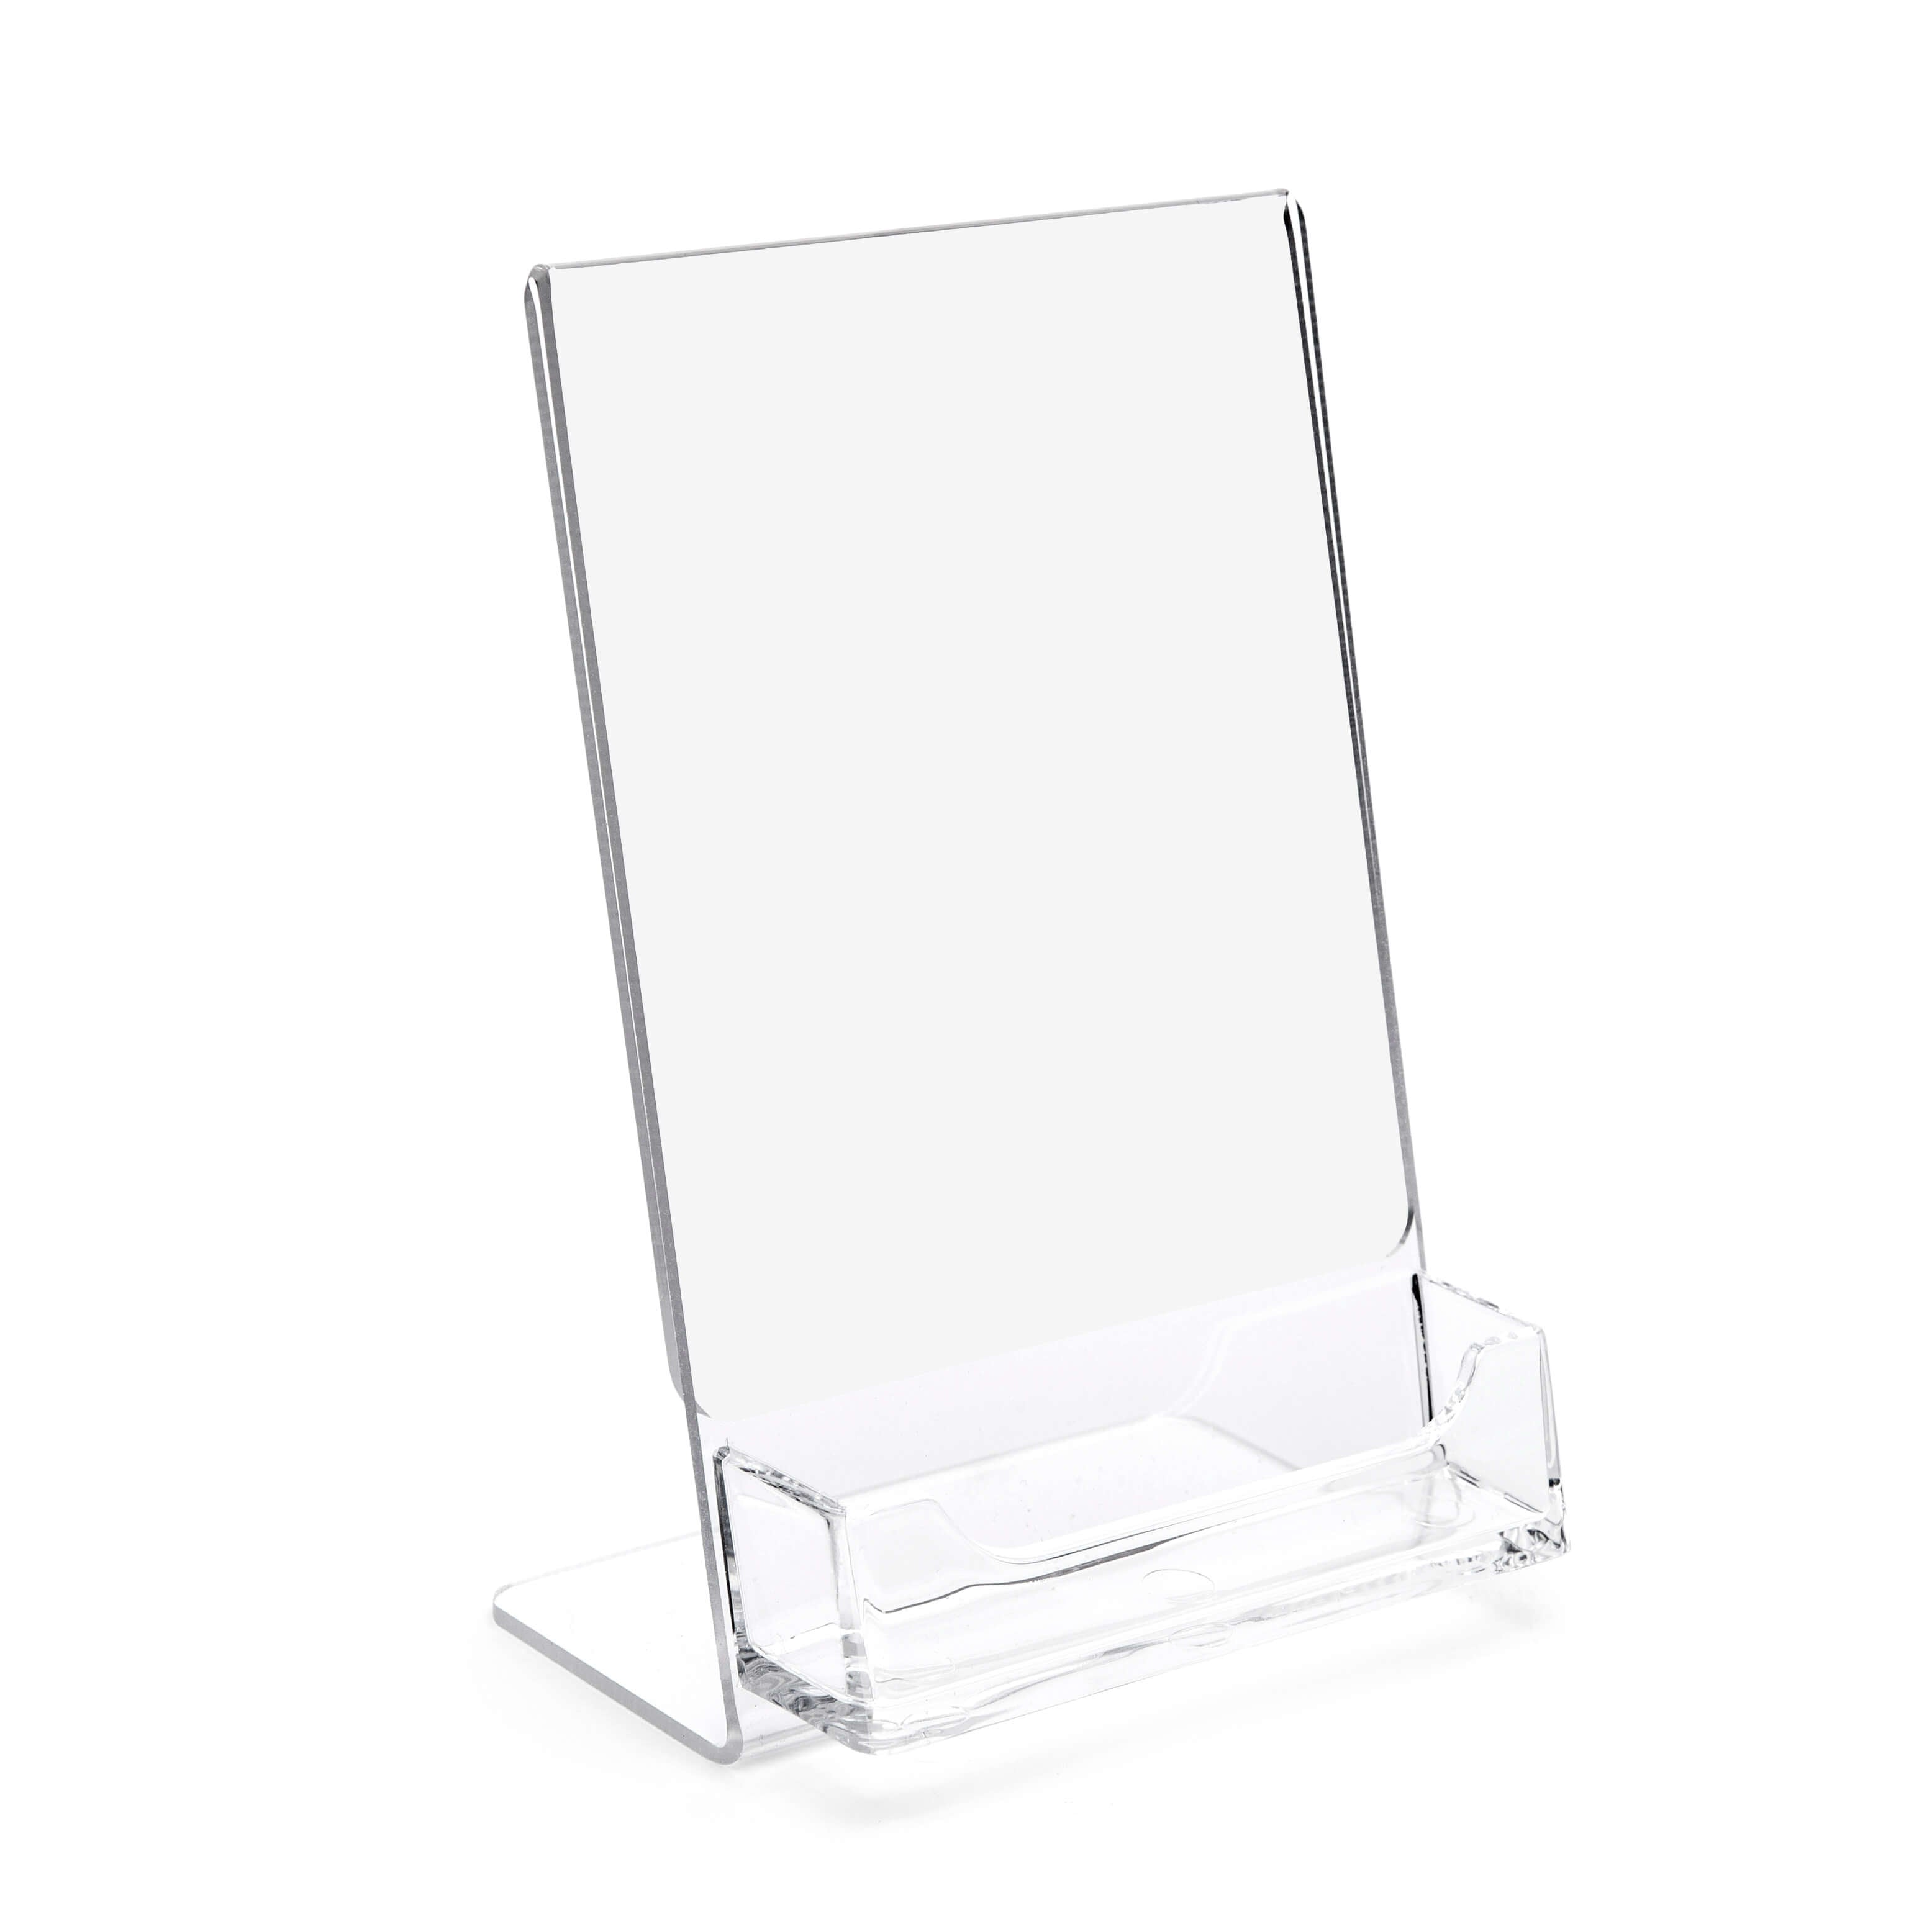 Shop Acrylic Sign Holders with Card Pockets Plastic Products Mfg –  Plastic Products mfg